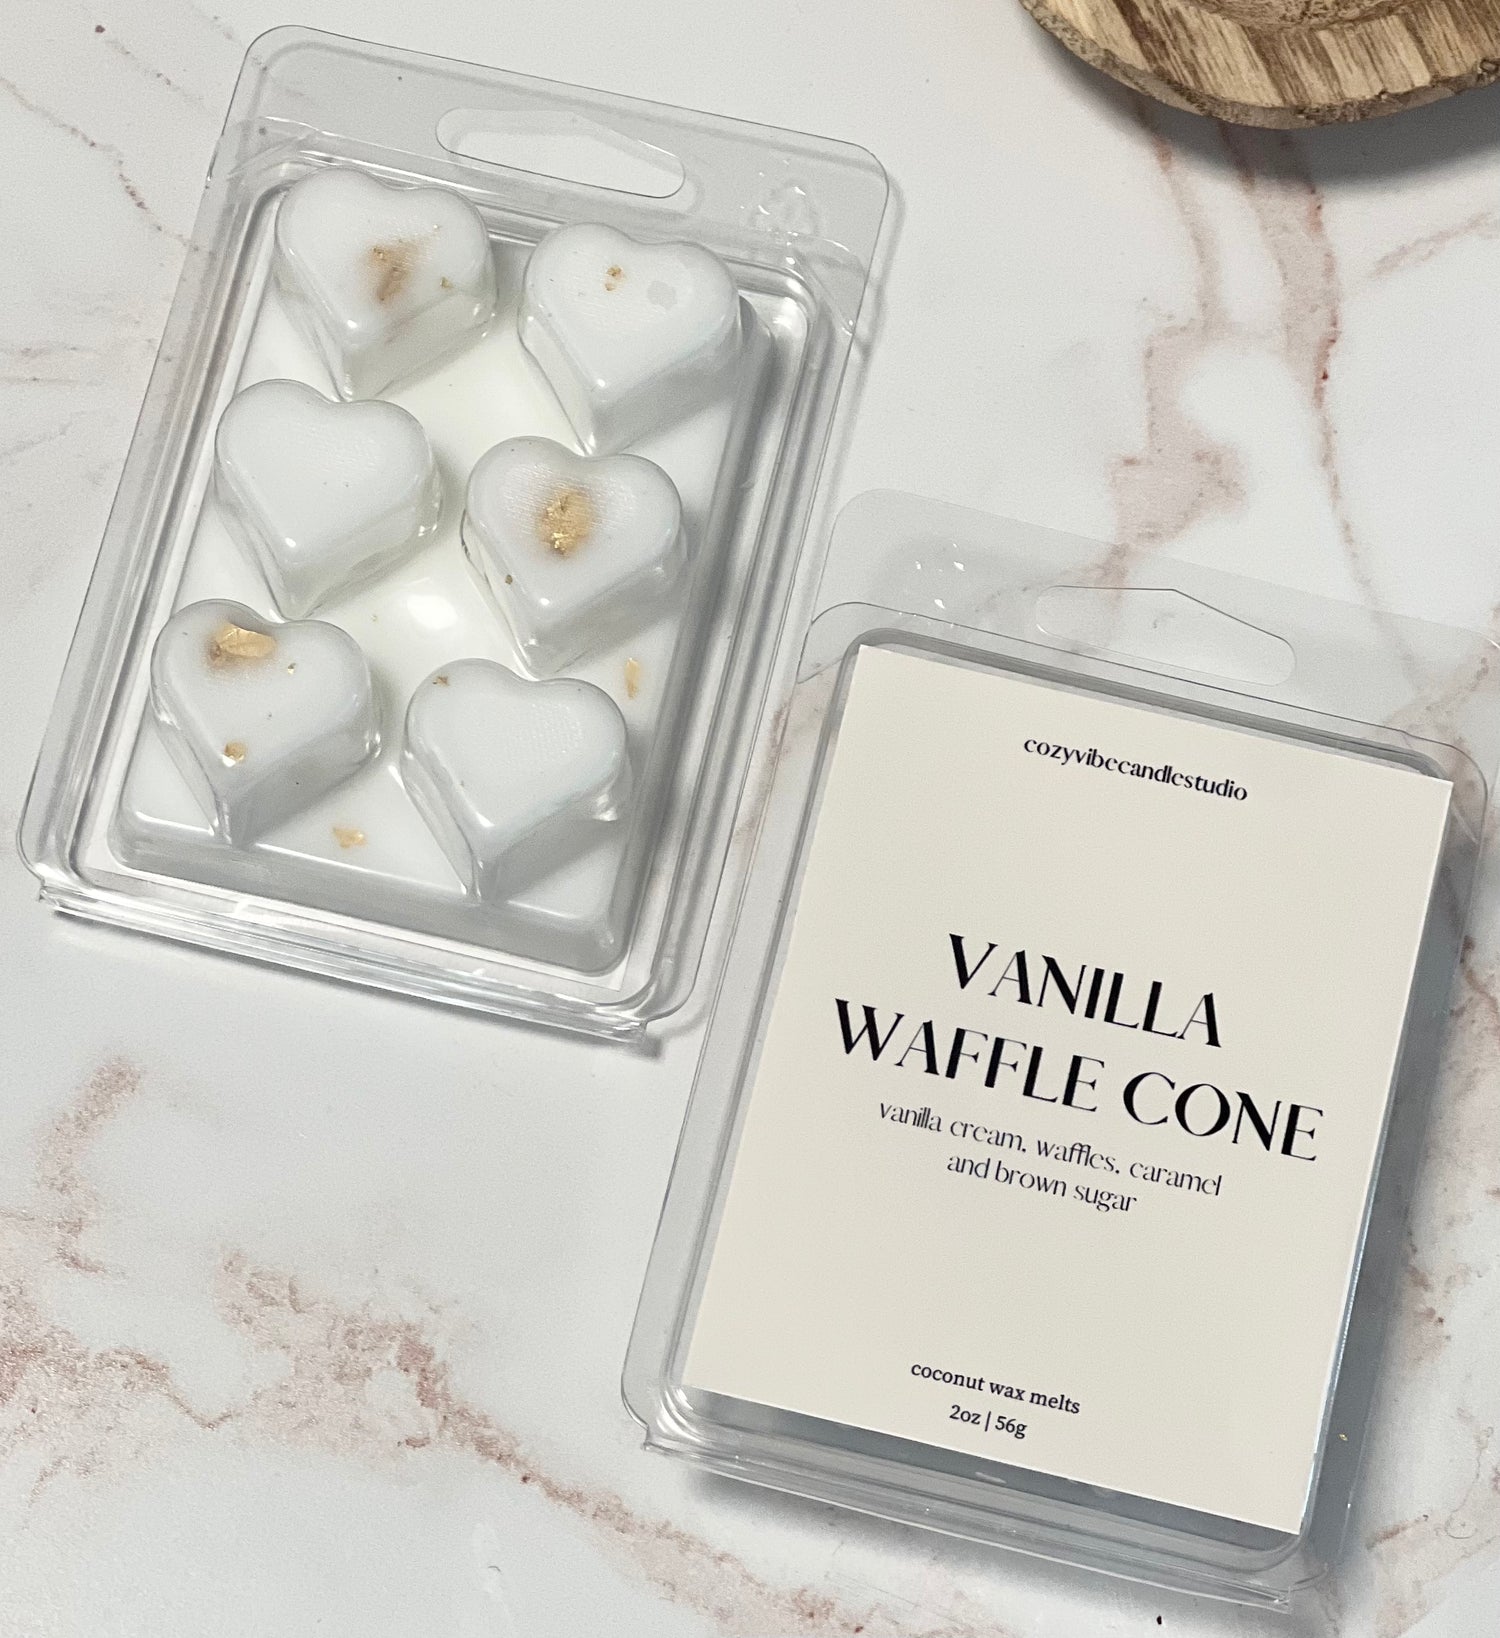 Coconut Wax Melts vs Soy Wax Melts - Which is Better? – Candlelore